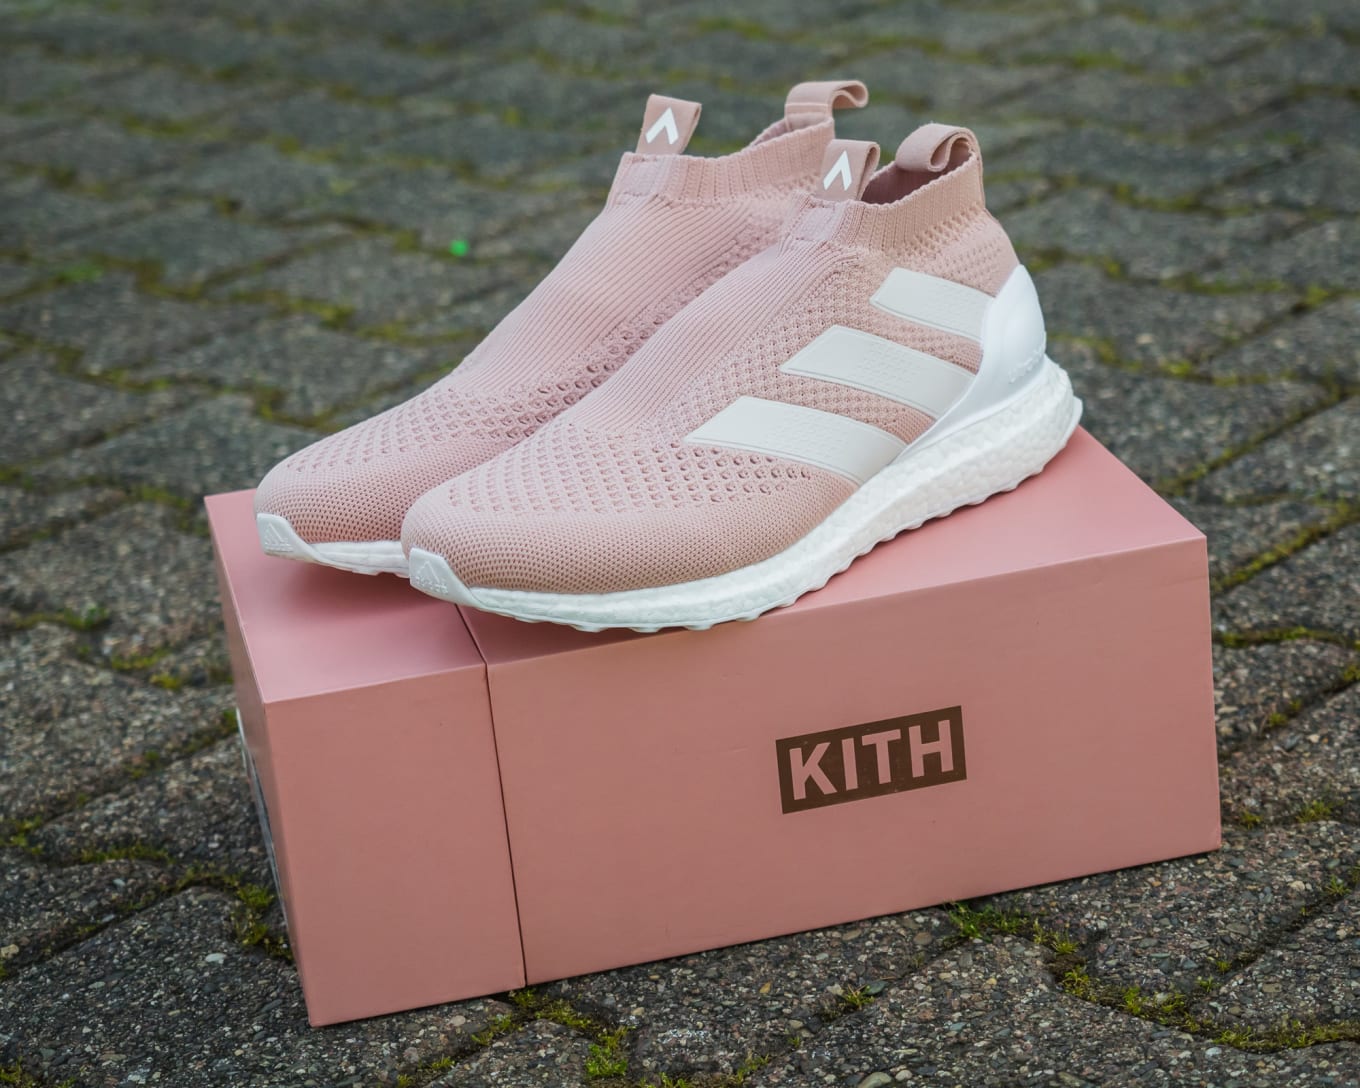 Kith Adidas Ultra Boost Ace 16 Flamingo CM7890 | Sole Collector